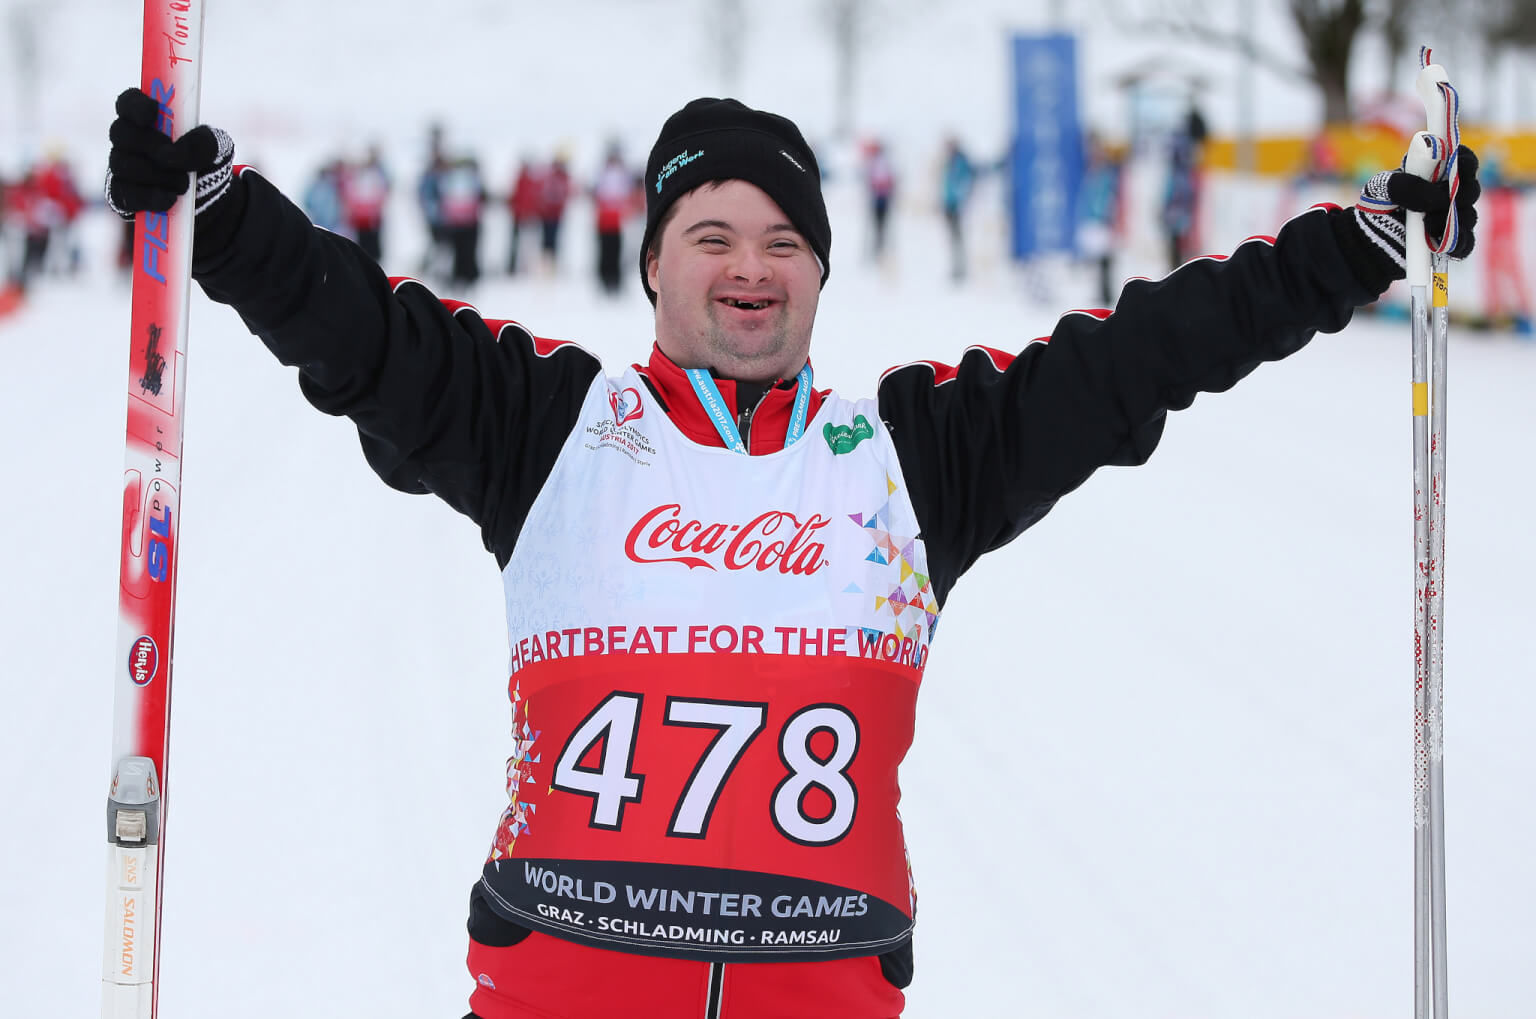 Special Olympics World Winter Games 2017, Photo: GEPA pictures/Harald Steiner